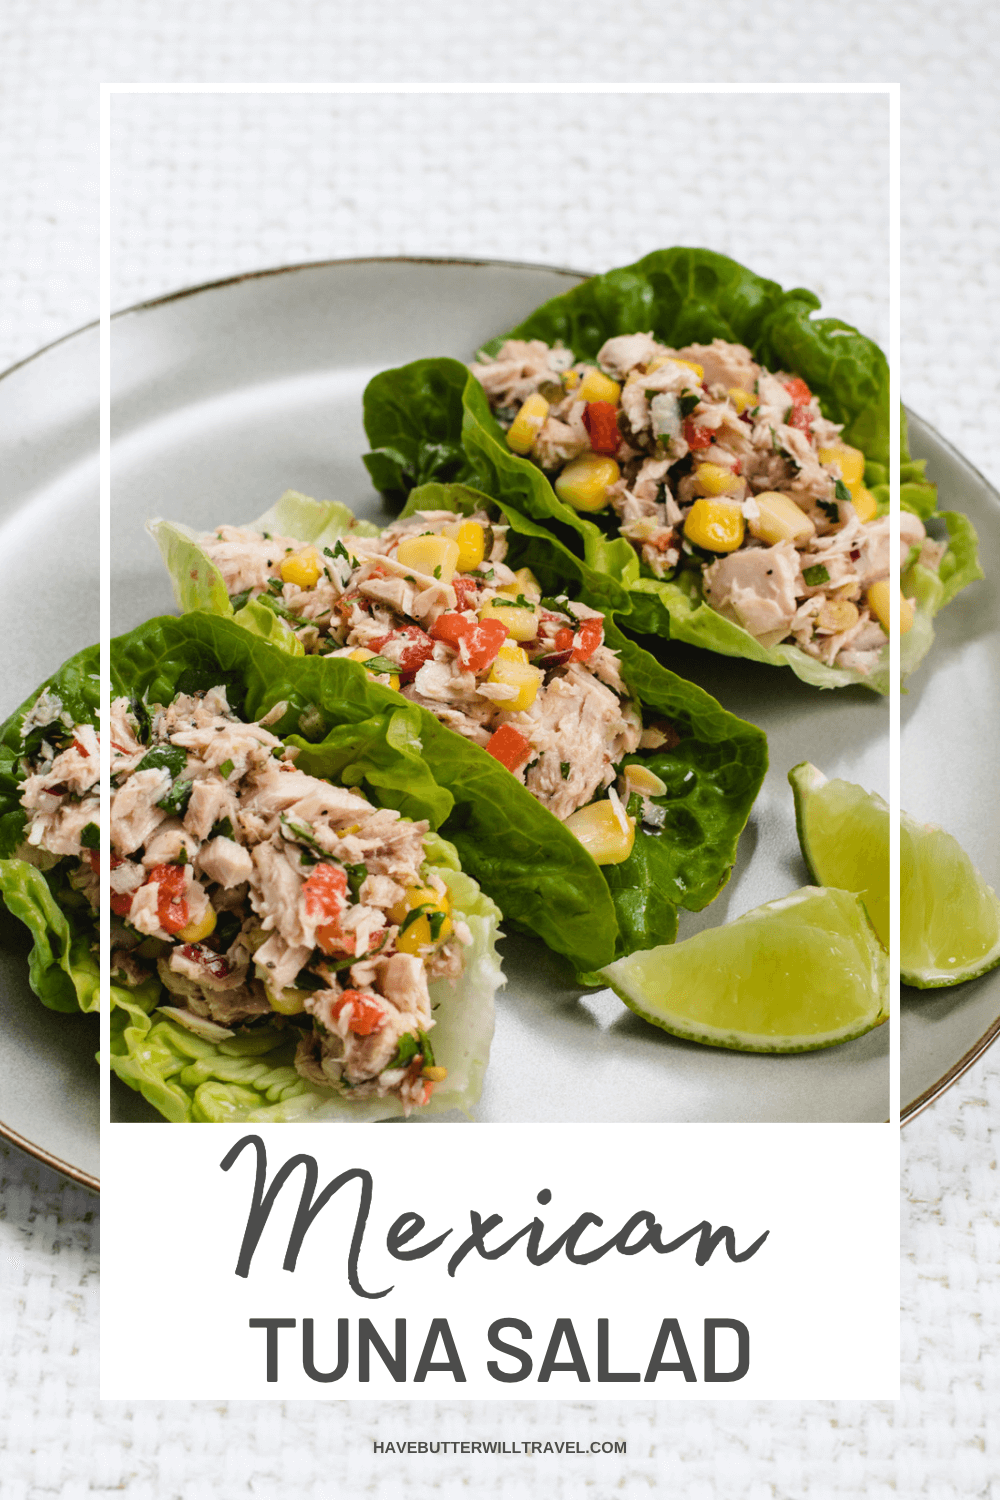 We wanted to create a vibrant and flavour-packed tuna salad recipe and this Mexican tuna salad definitely hits the spot!